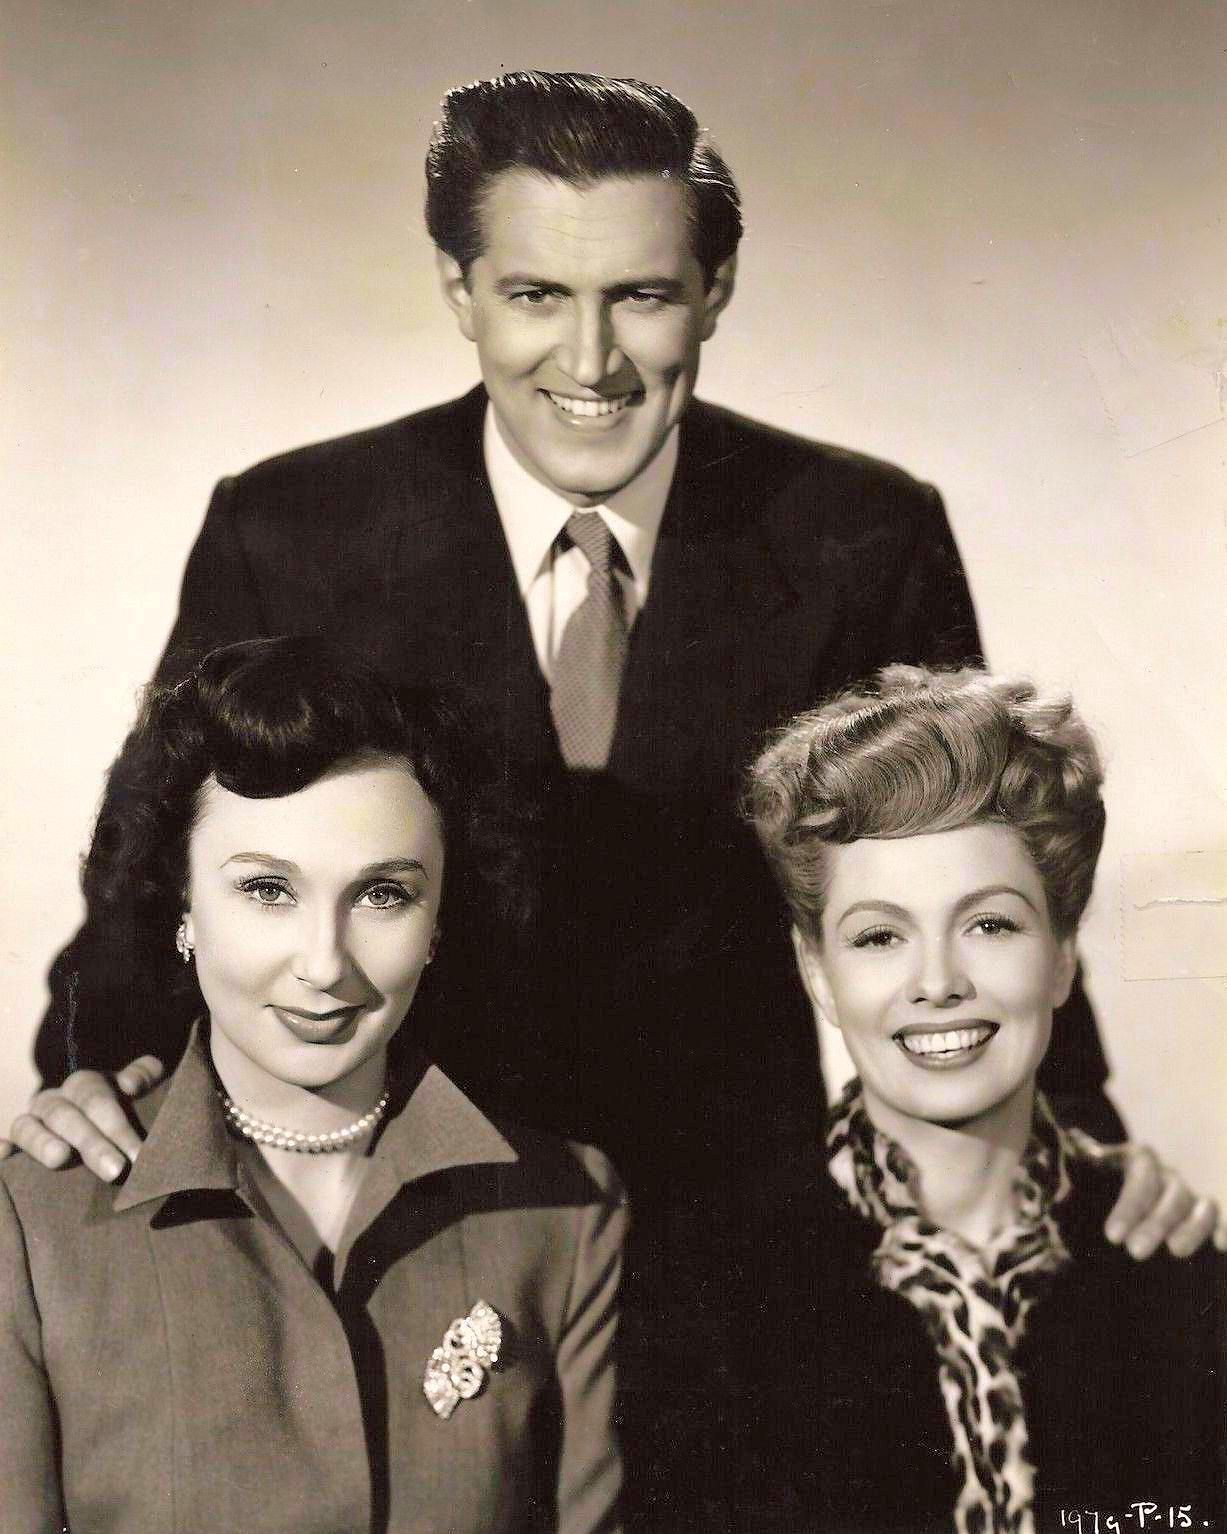 Photograph from Traveller’s Joy (1950) (1) featuring Googie Withers, John McCallum and Yolande Donlan